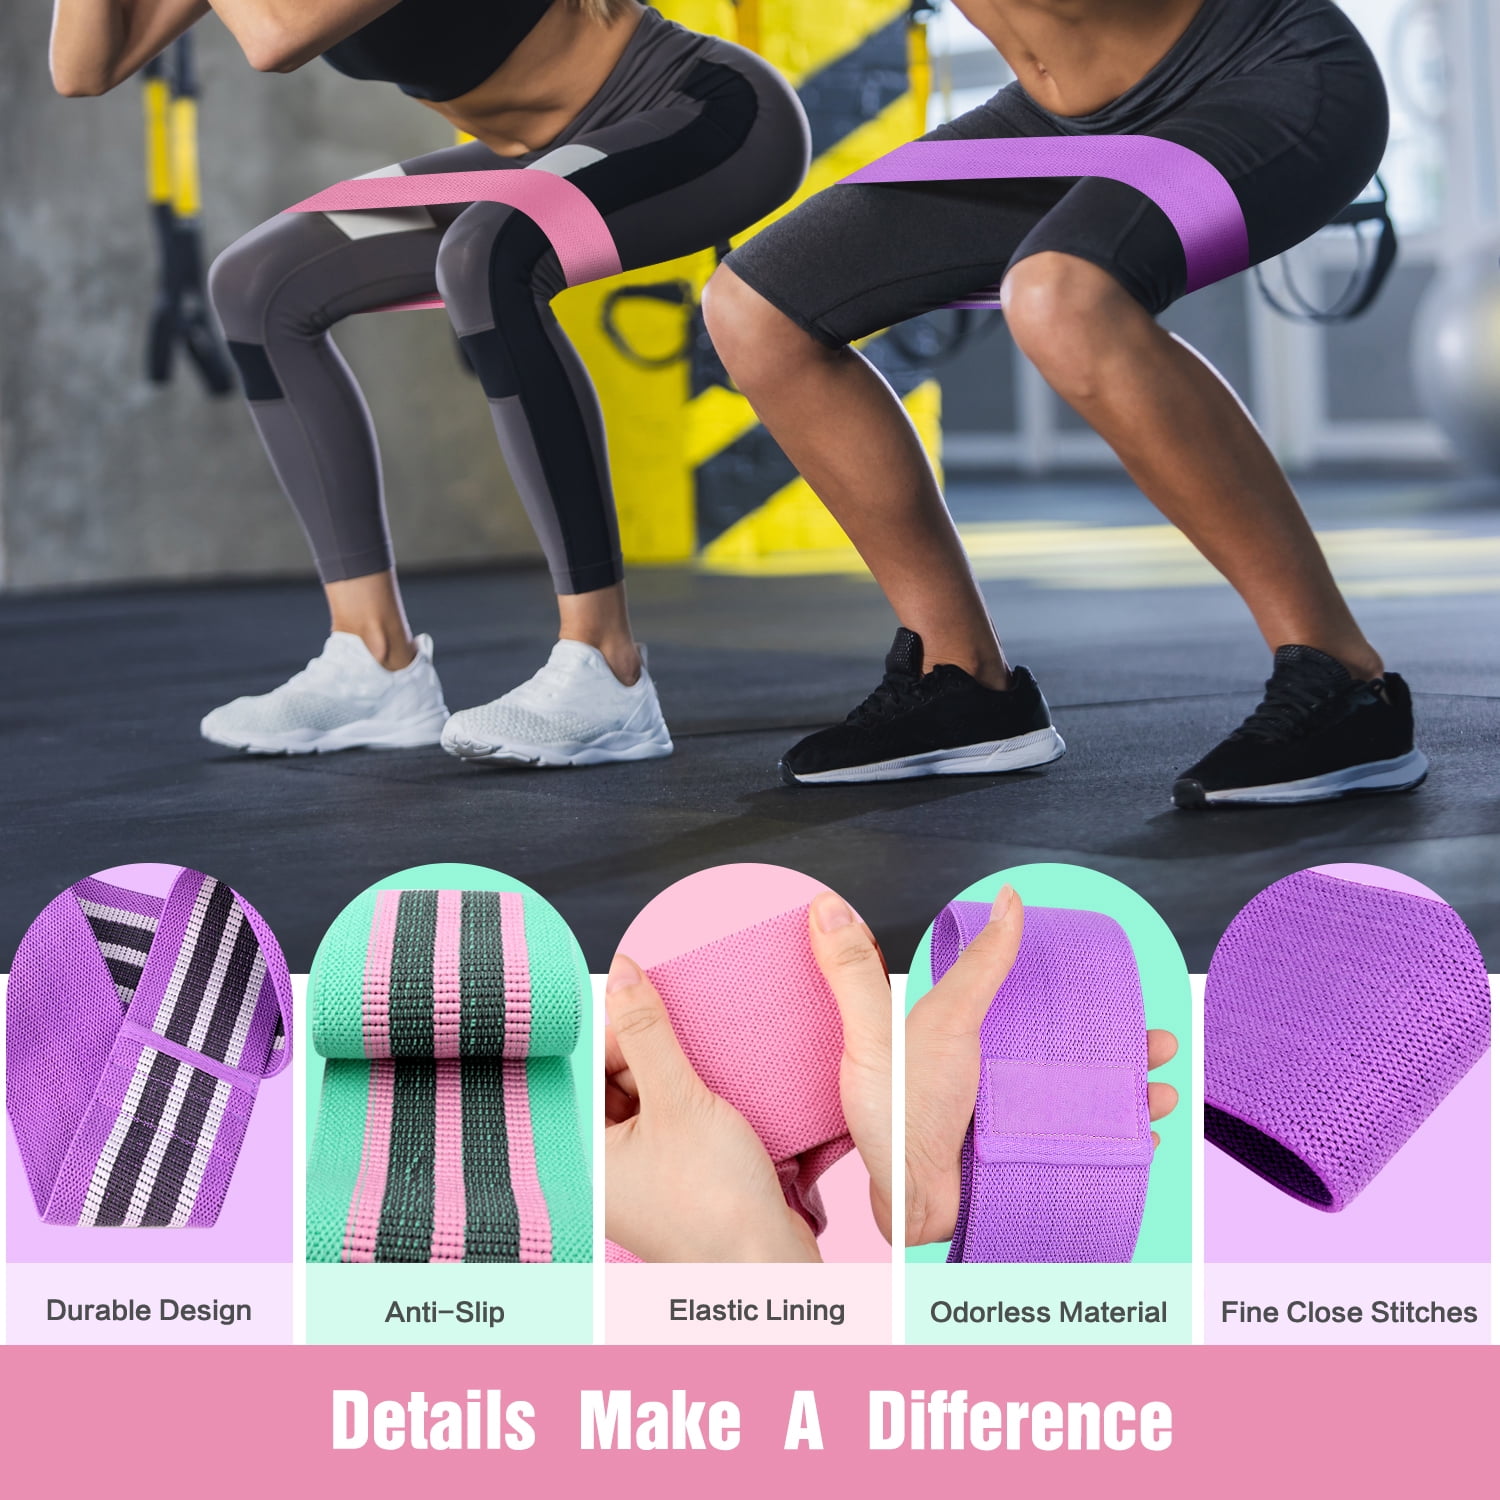 Glute Adjustable Exercise Bands Kmart For Booty And Butt Lift